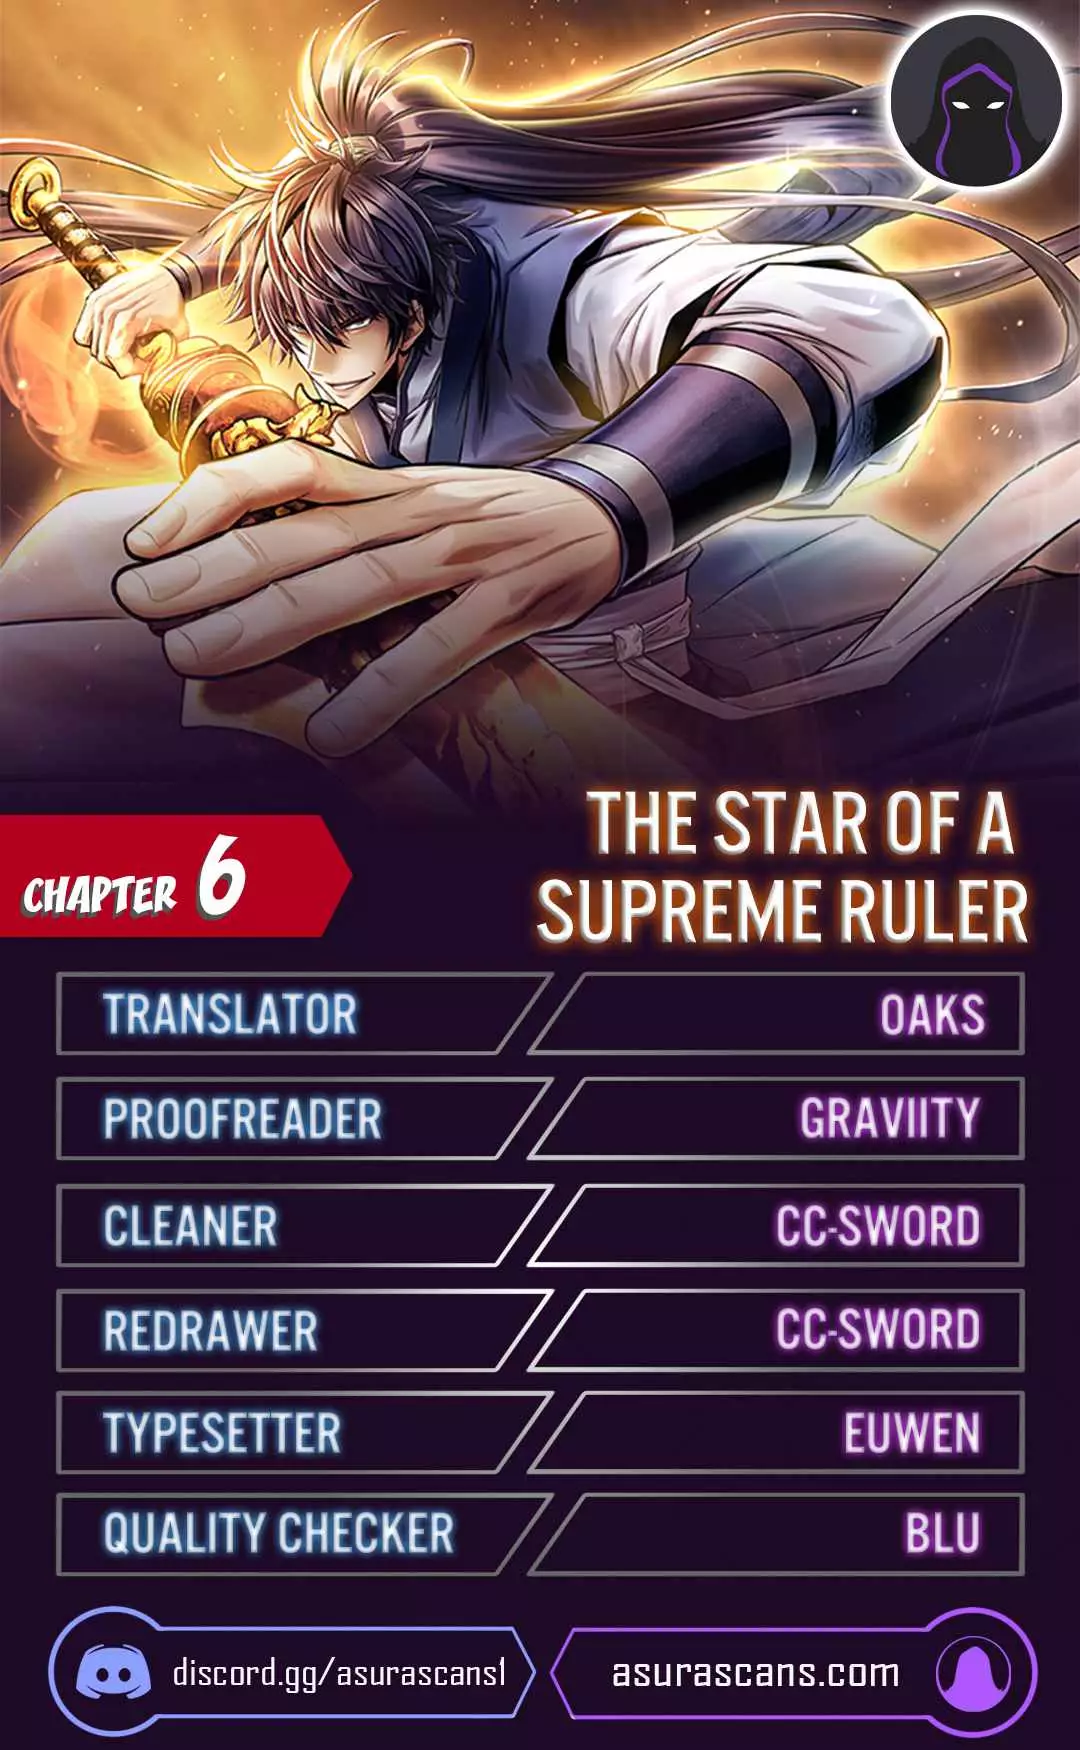 The Star Of A Supreme Ruler - 6 page 1-e2c2860a